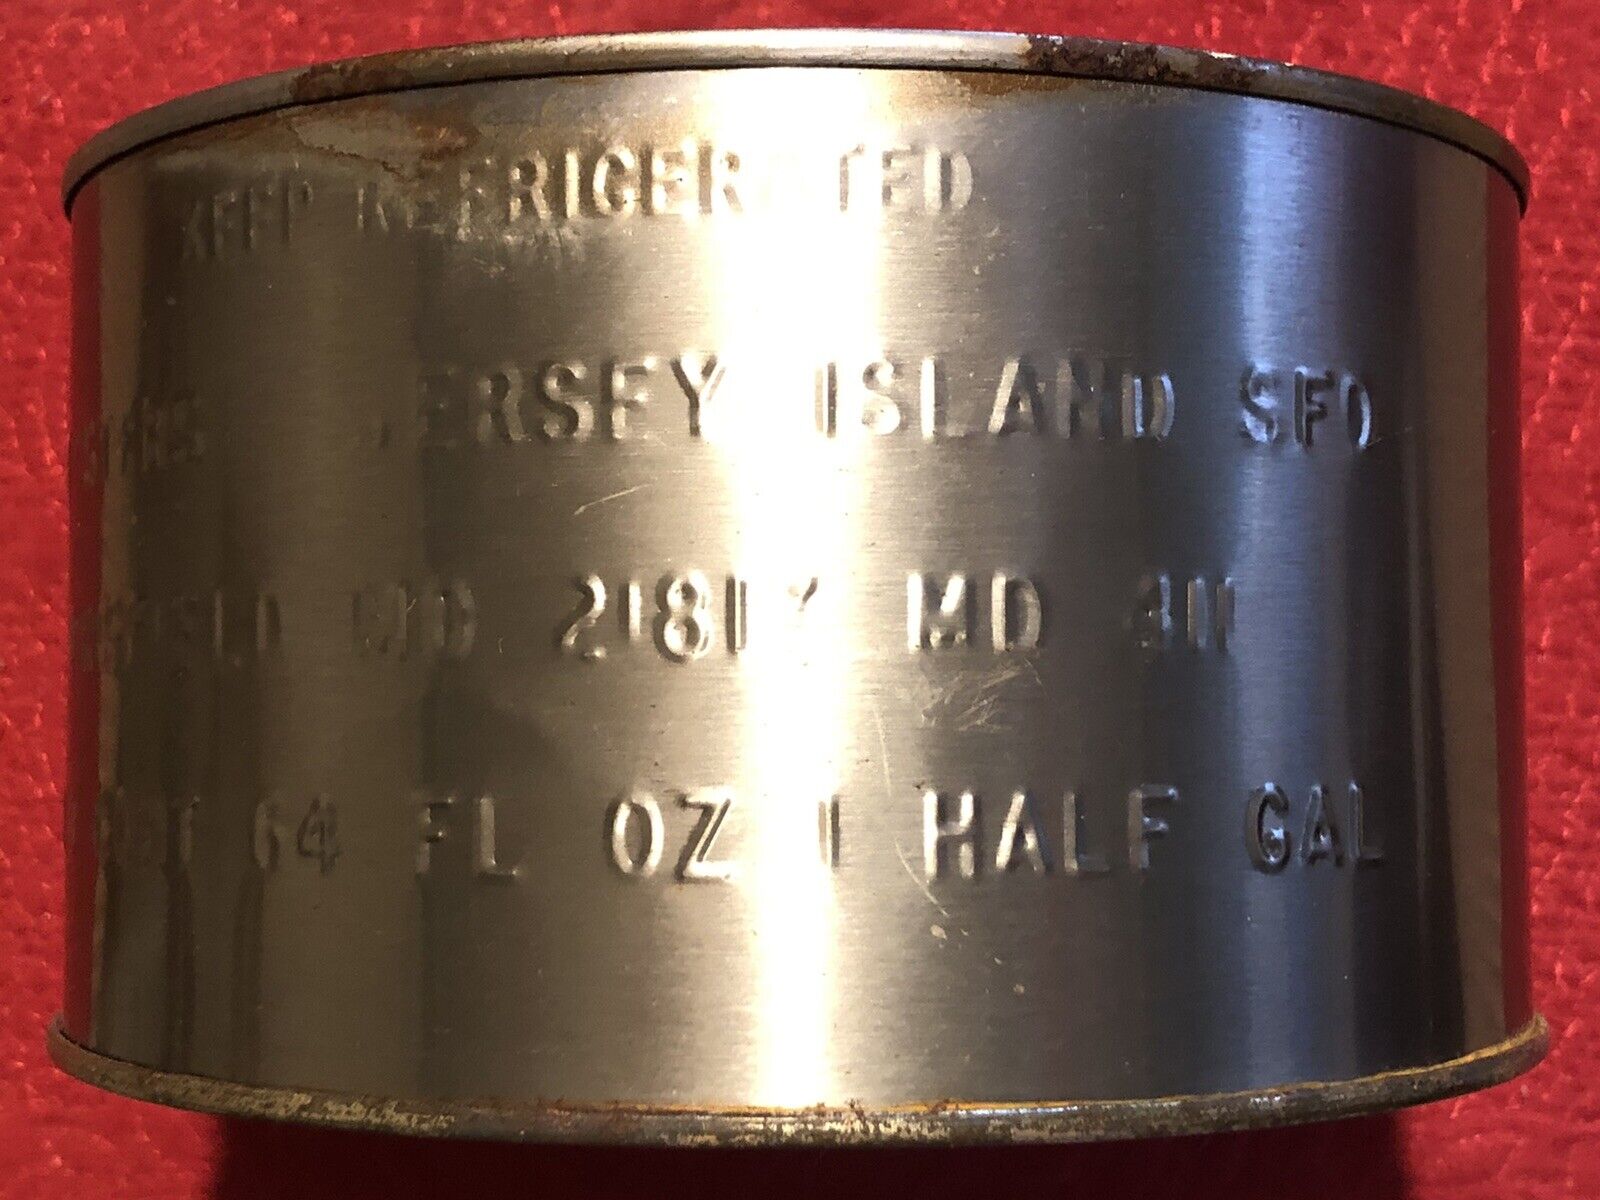 Jersey Island Sfd Crisfield Somerset Co  MD Maryland half-gallon tin can oyster